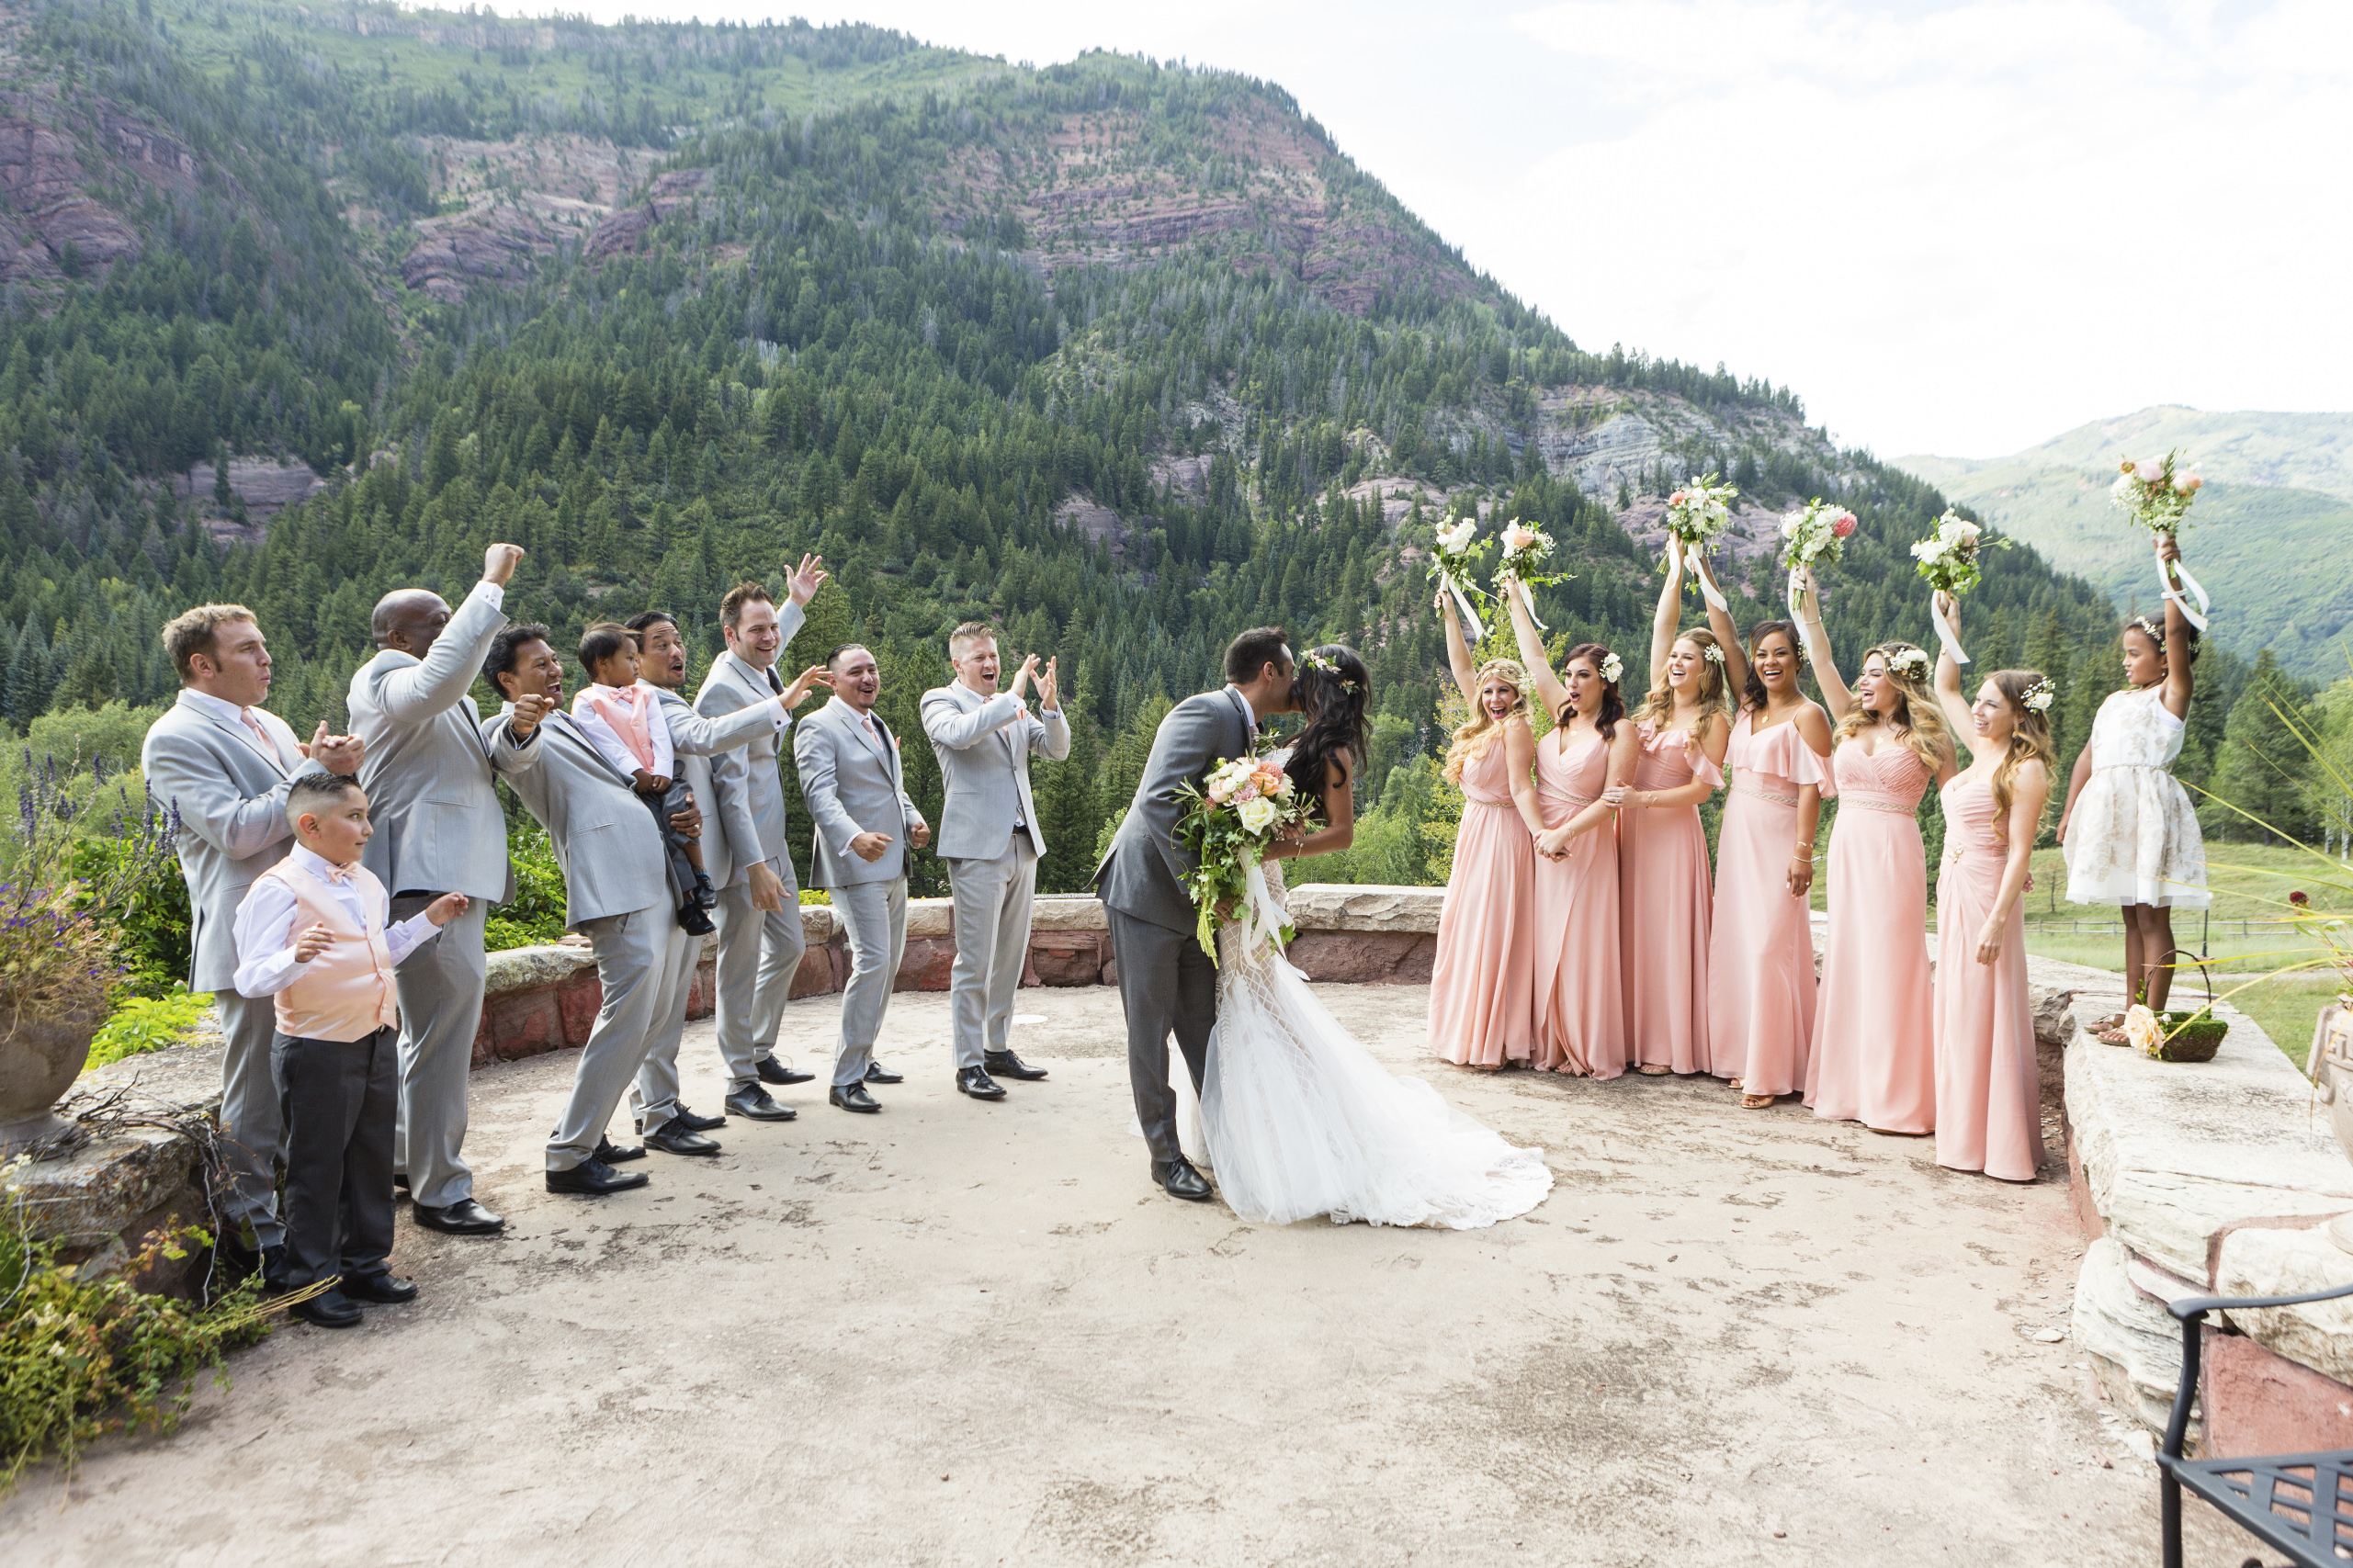 Wedding Party Photos in the Colorado Rockies | Windfirm Photography